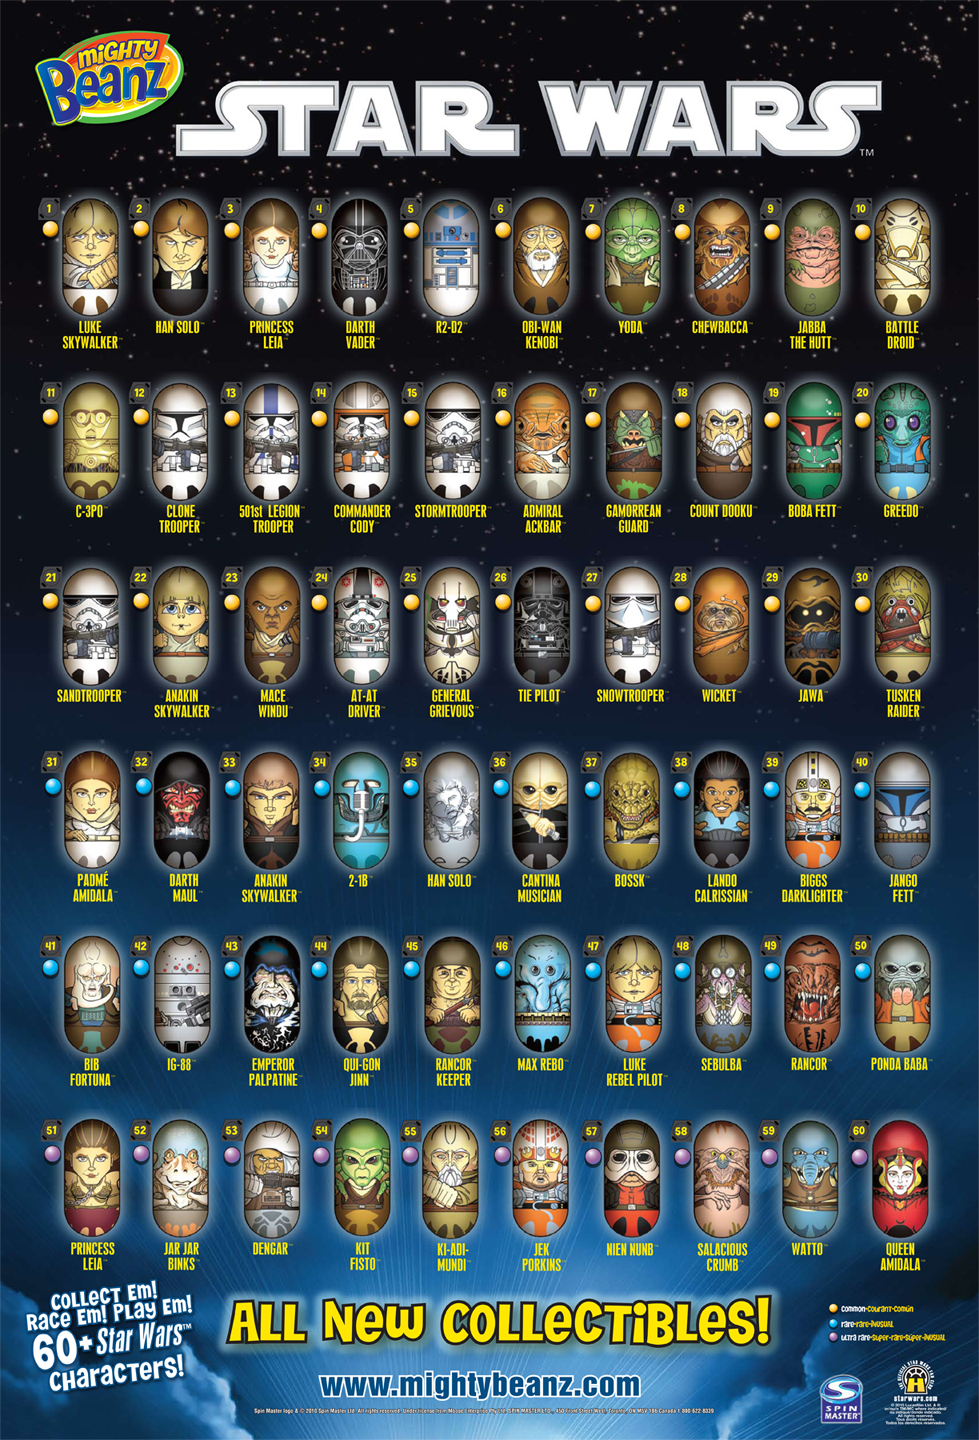 Image Star wars mighty beanz poster by bryanlouie